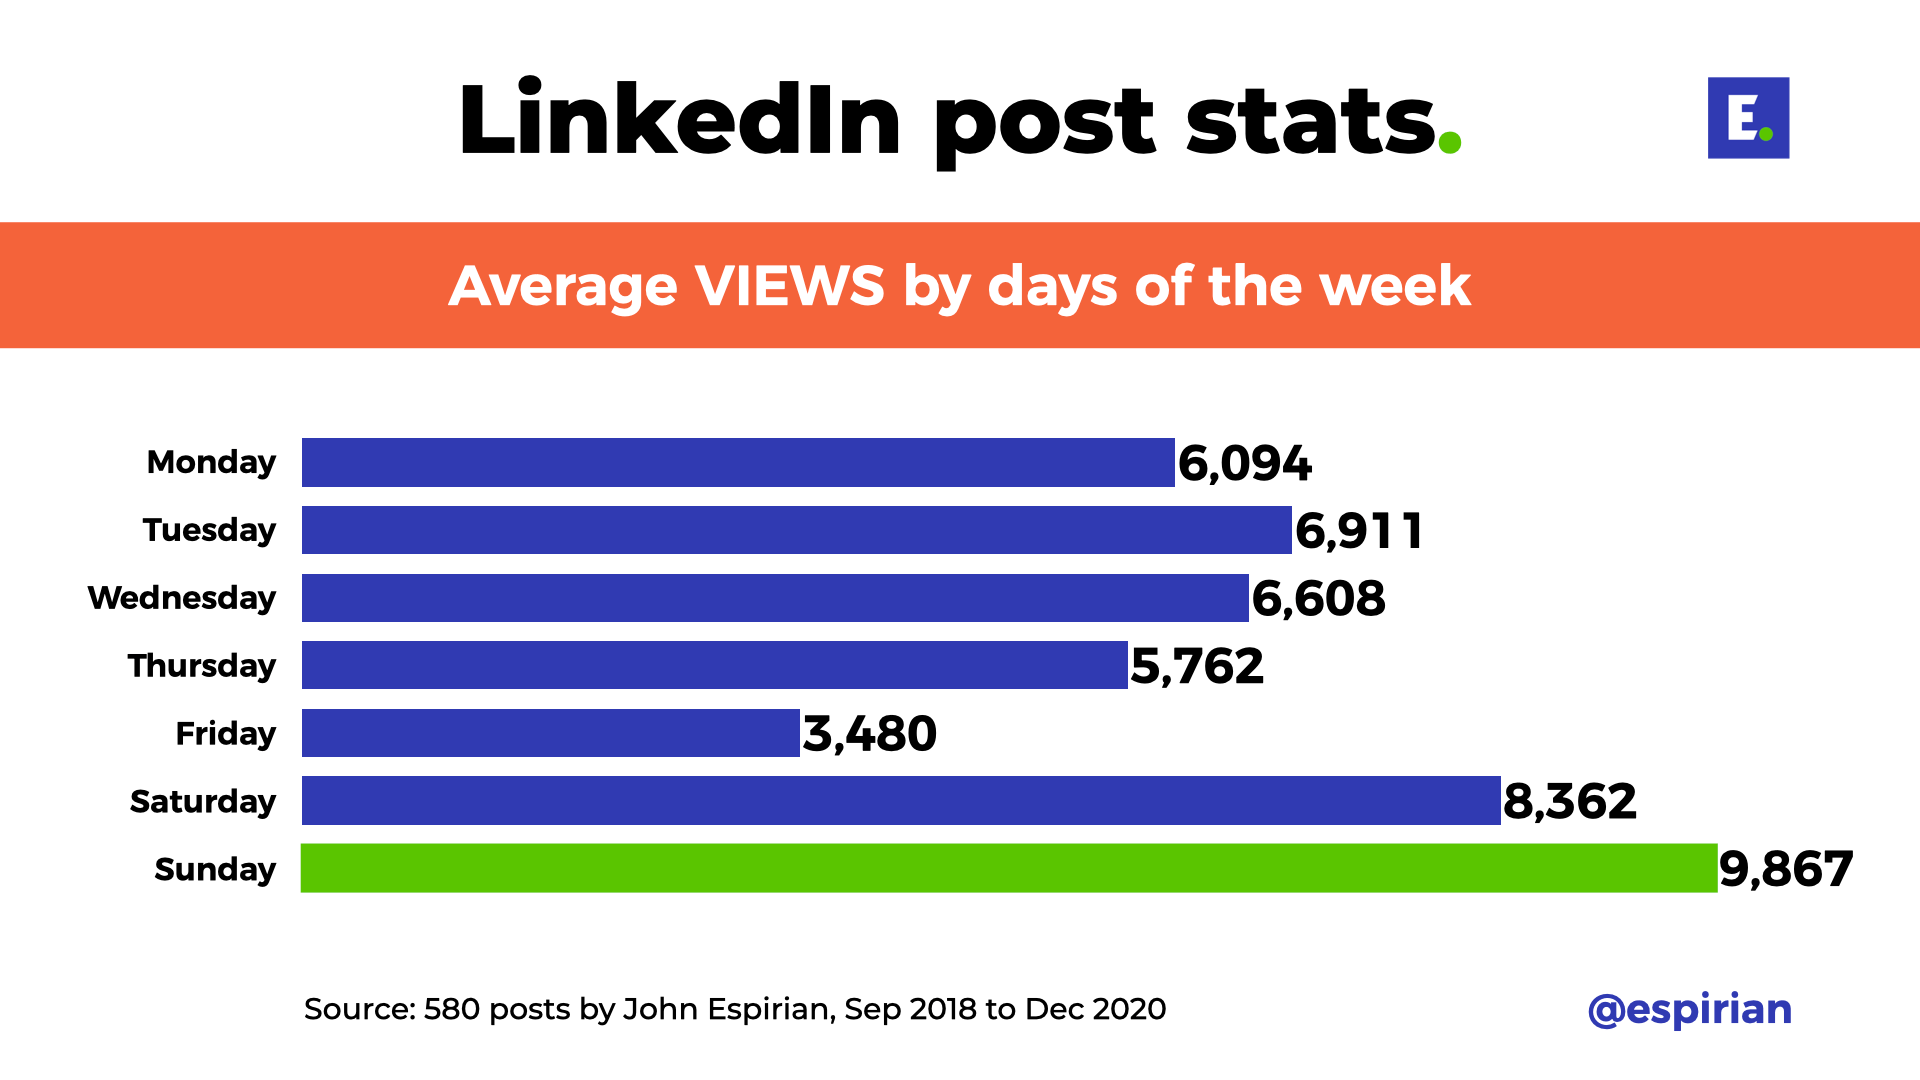 Average post views by days of the week